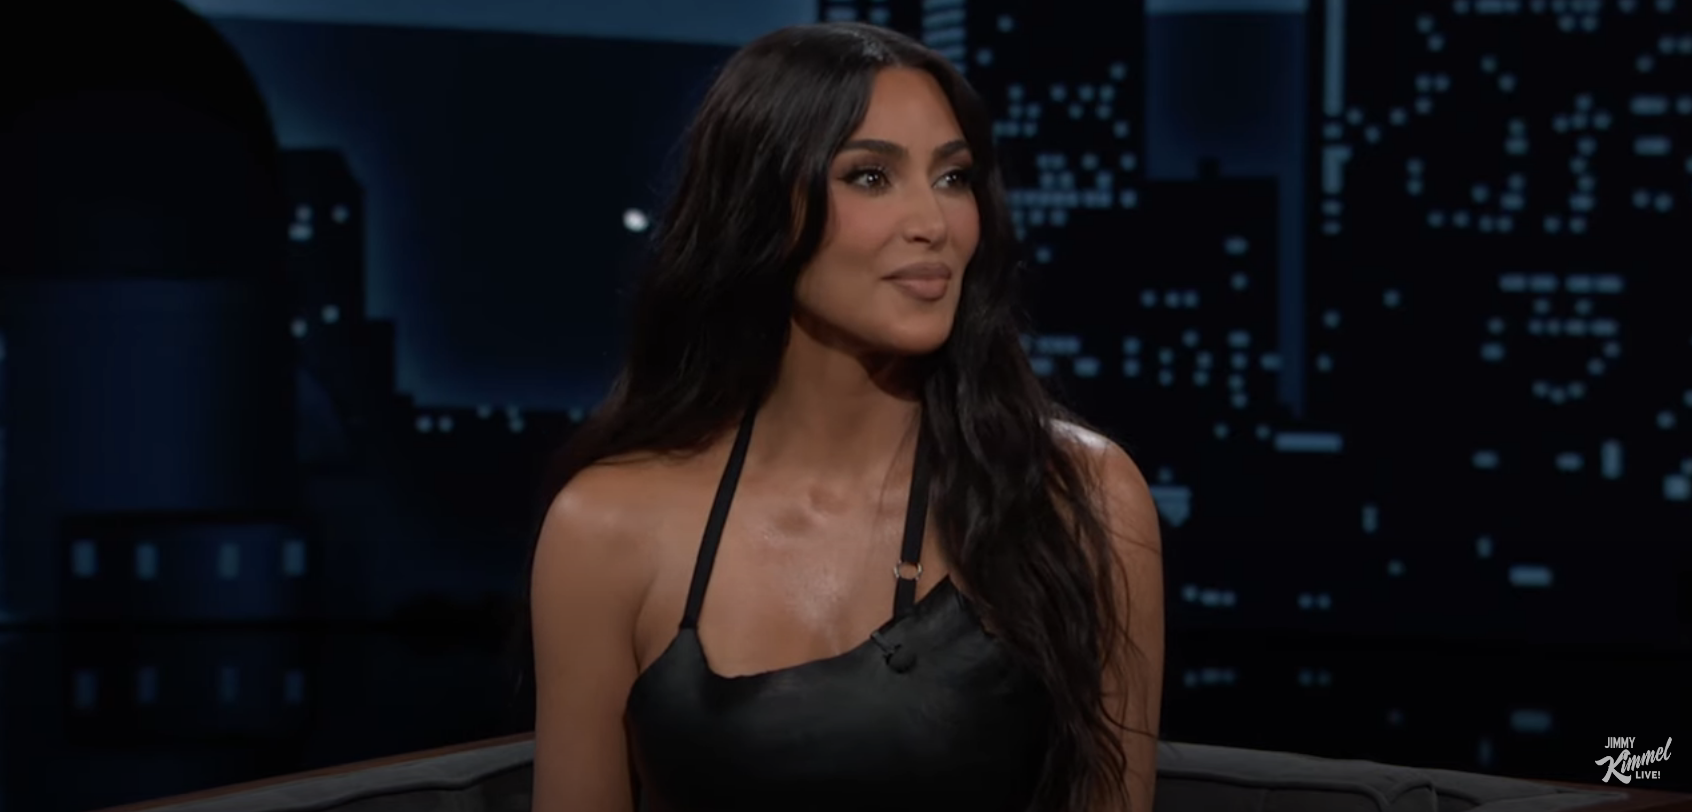 Kim Kardashian wearing a black top, seated during a TV interview